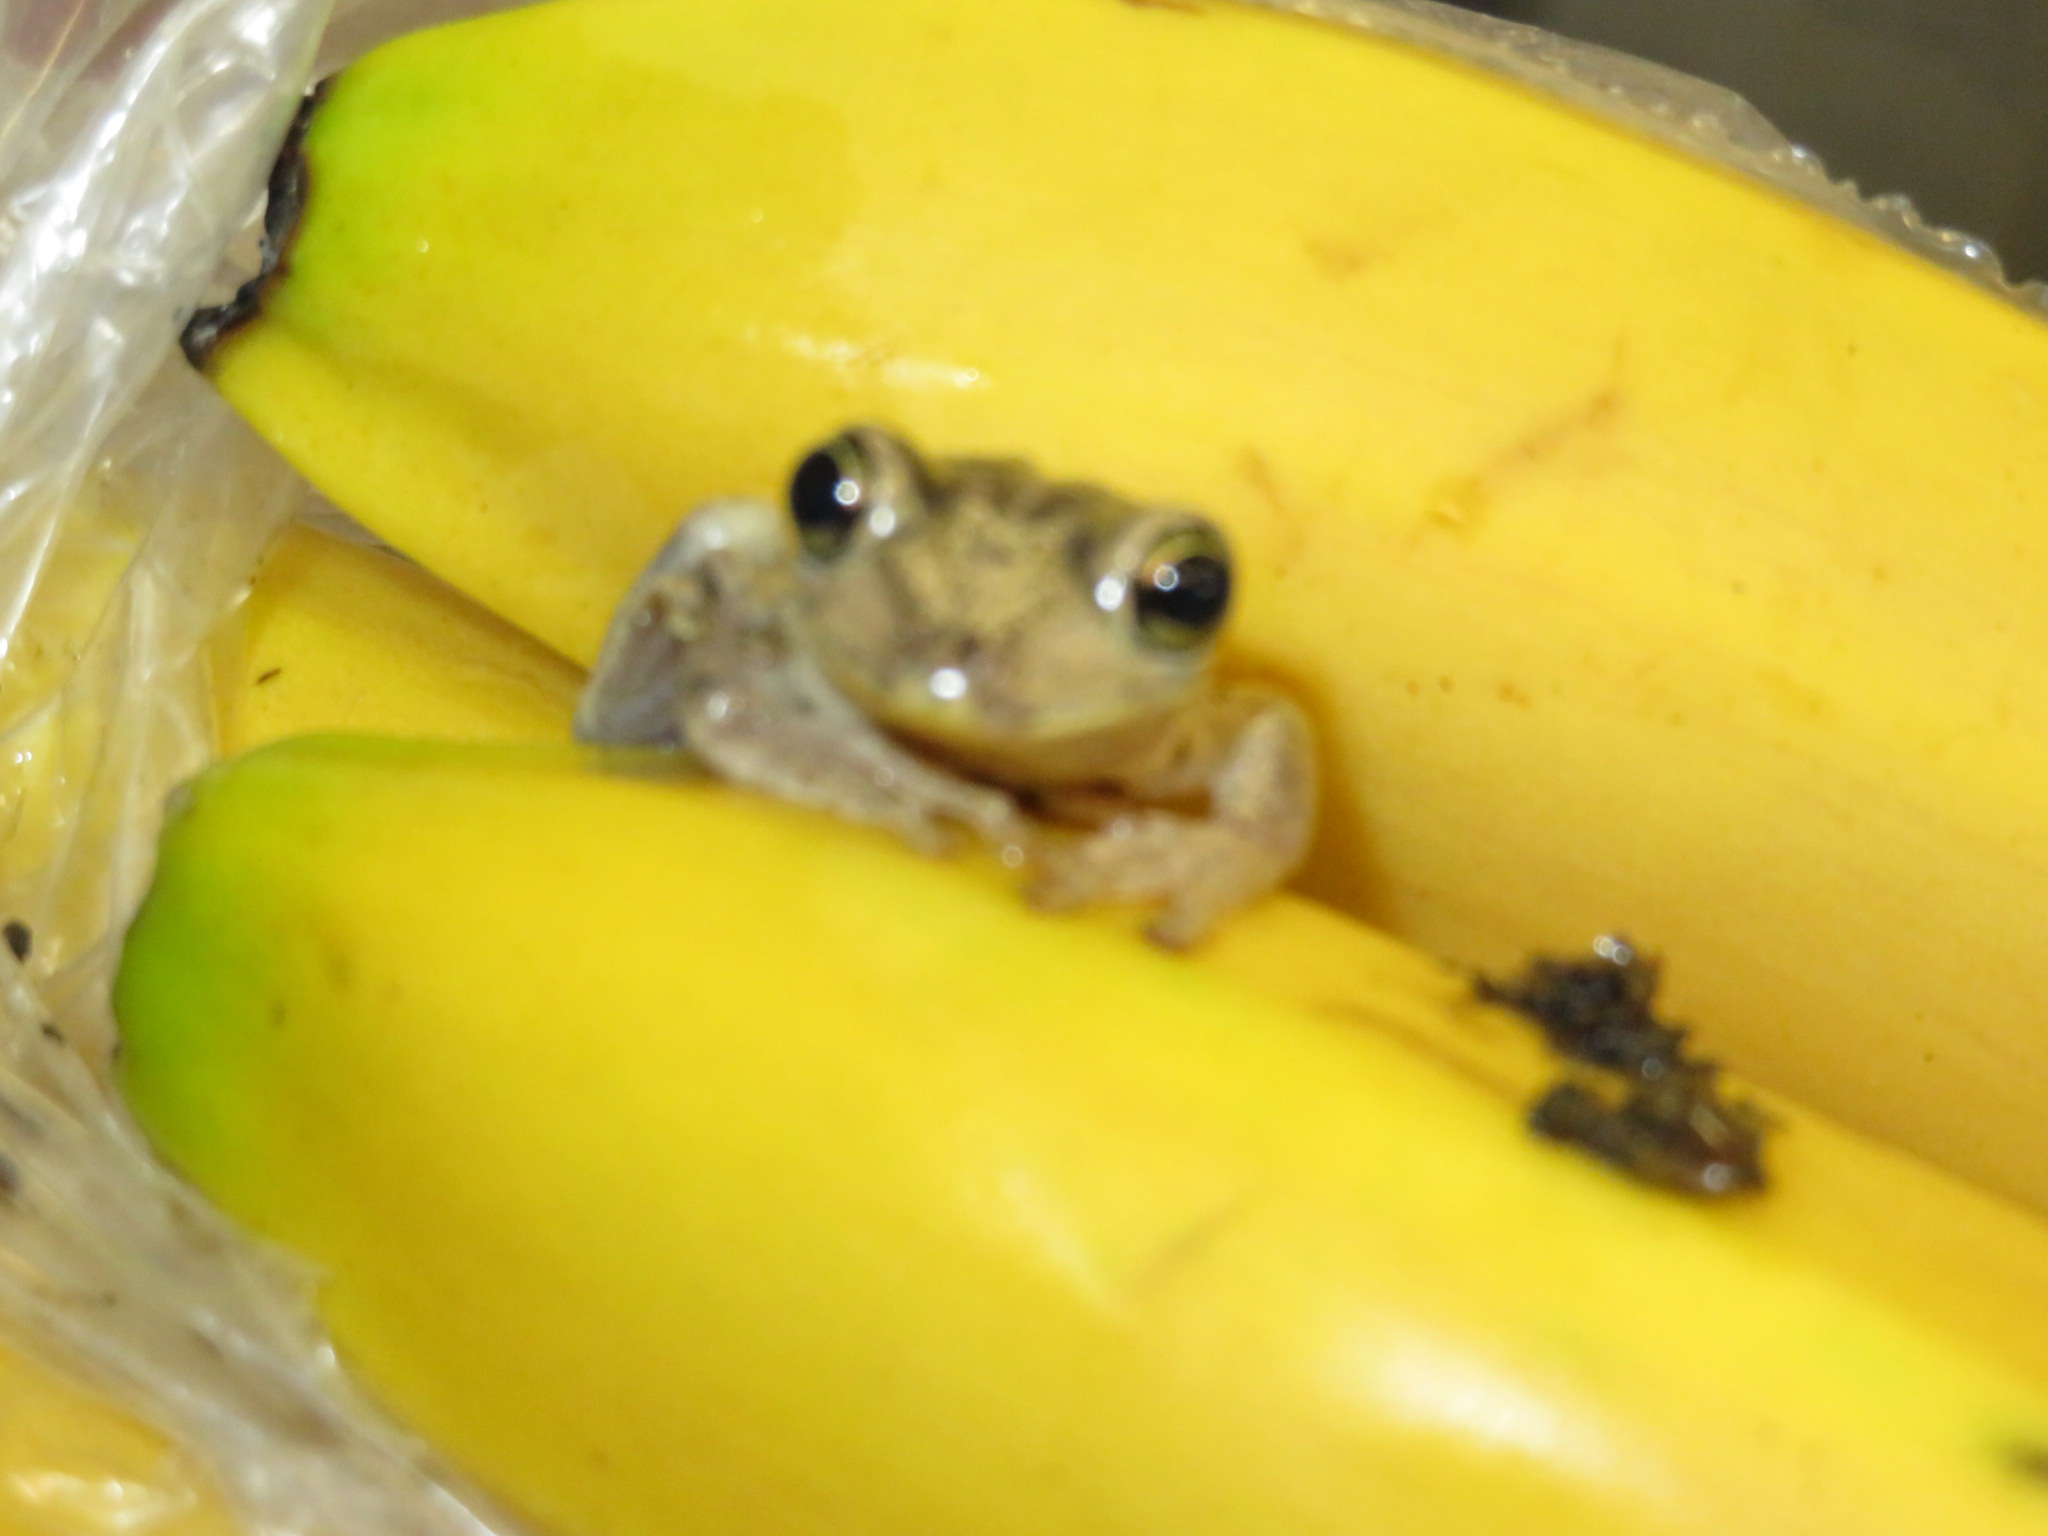 Tree frog found in Tesco bananas (RSPCA)